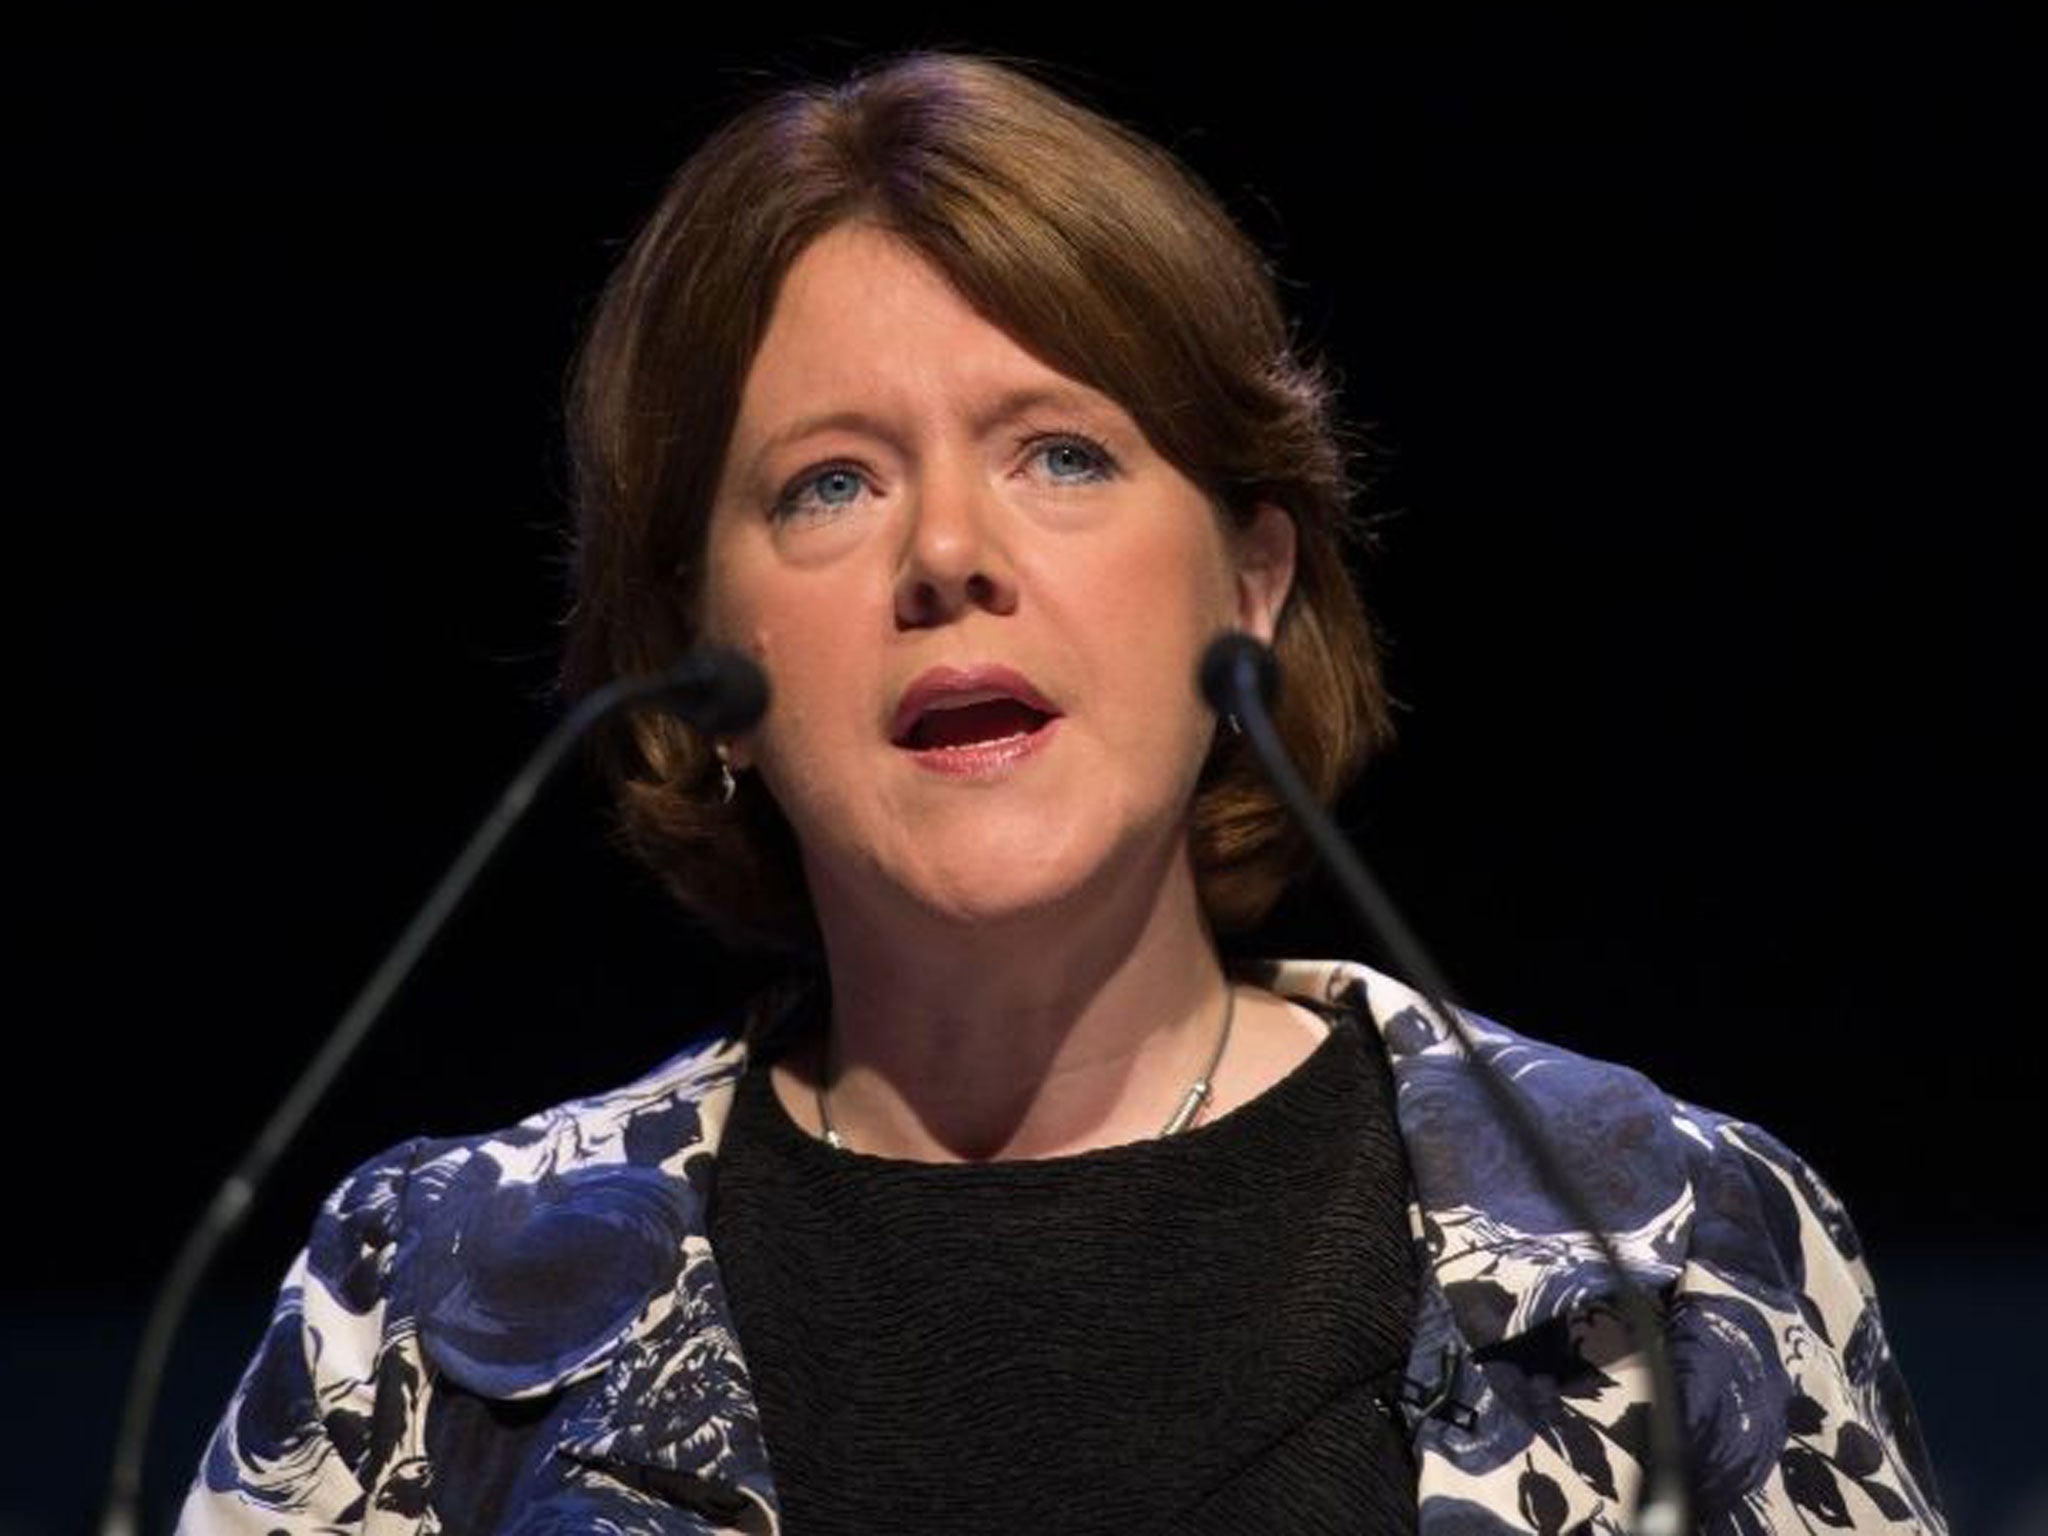 Culture Secretary Maria Miller would have had increased powers under the proposed changes